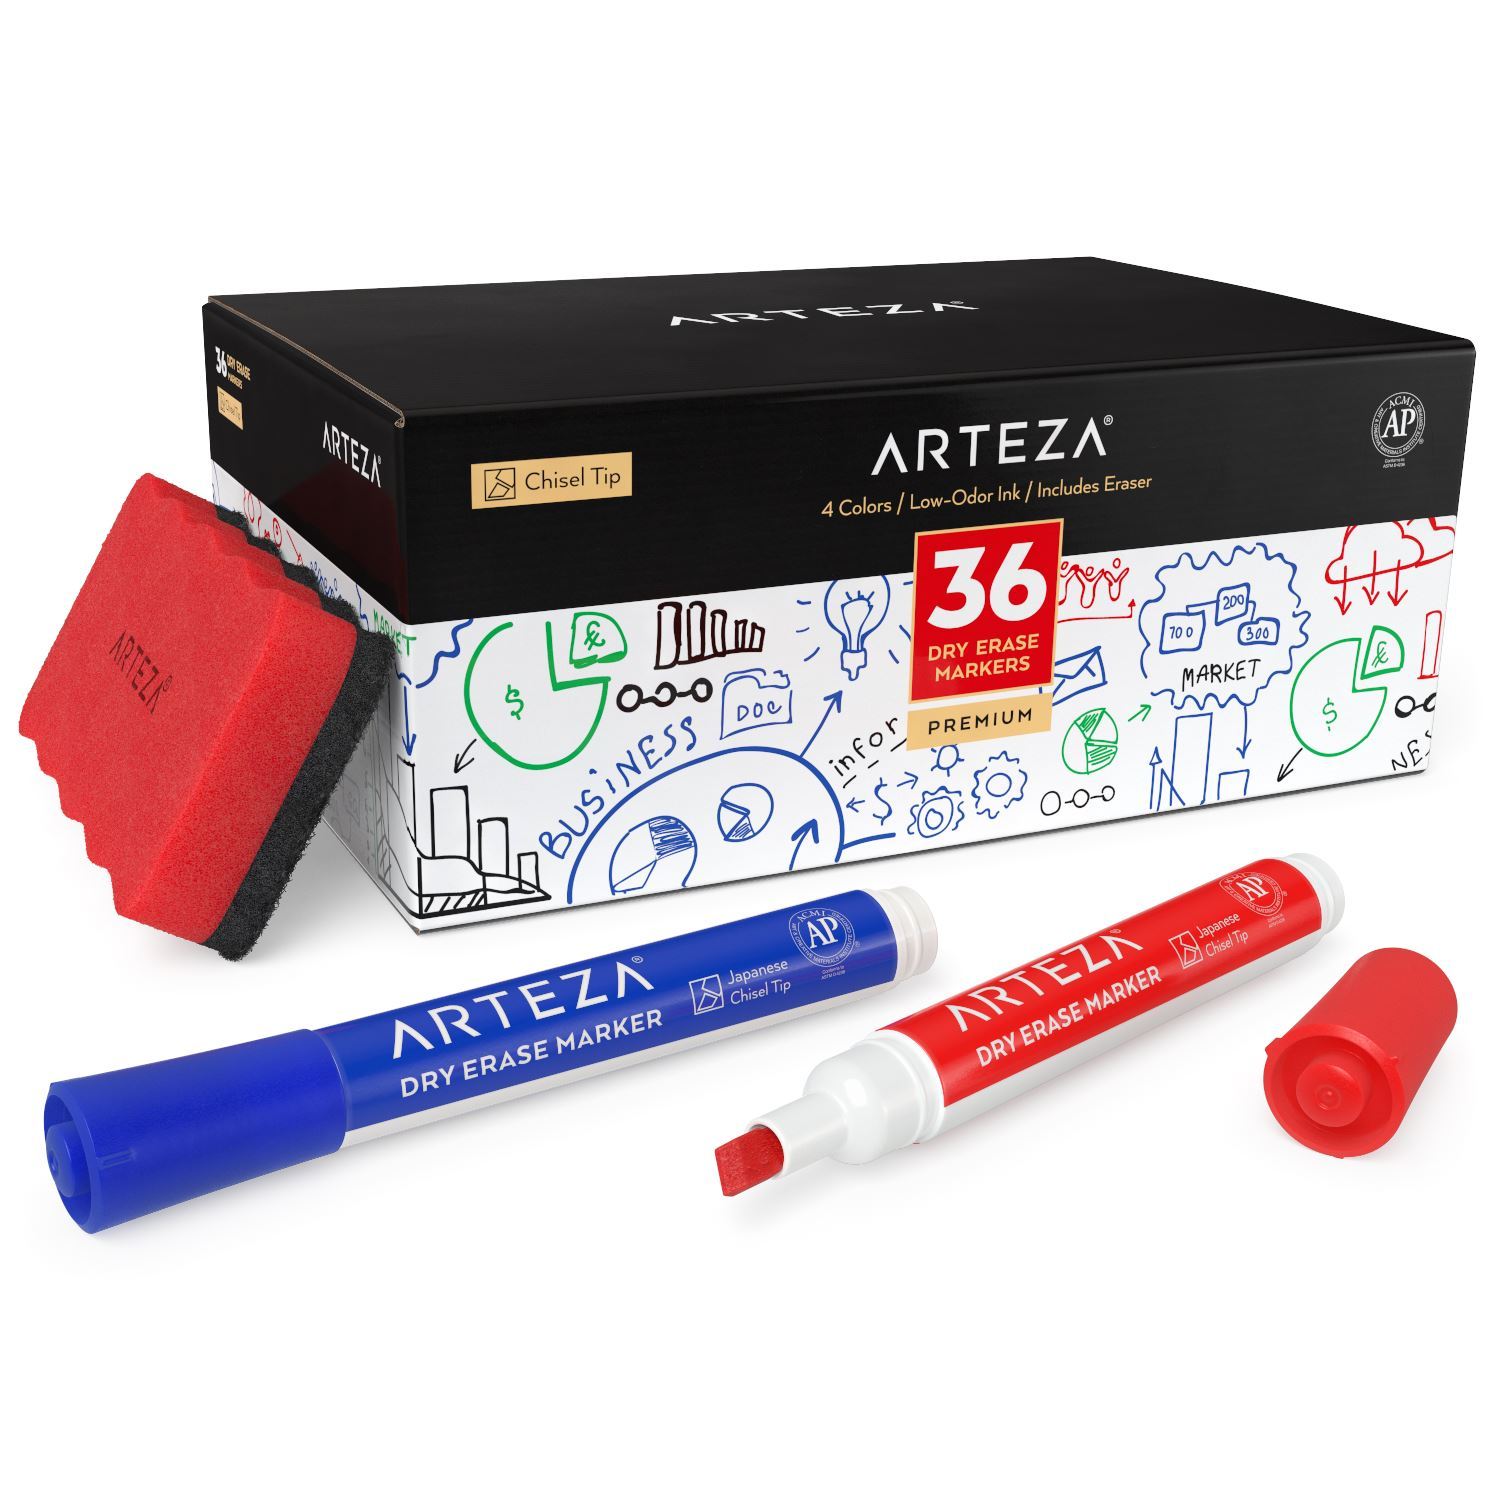 Arteza Magnetic Dry Erase Markers with Eraser, Pack of 36 (with Fine Tip), Black